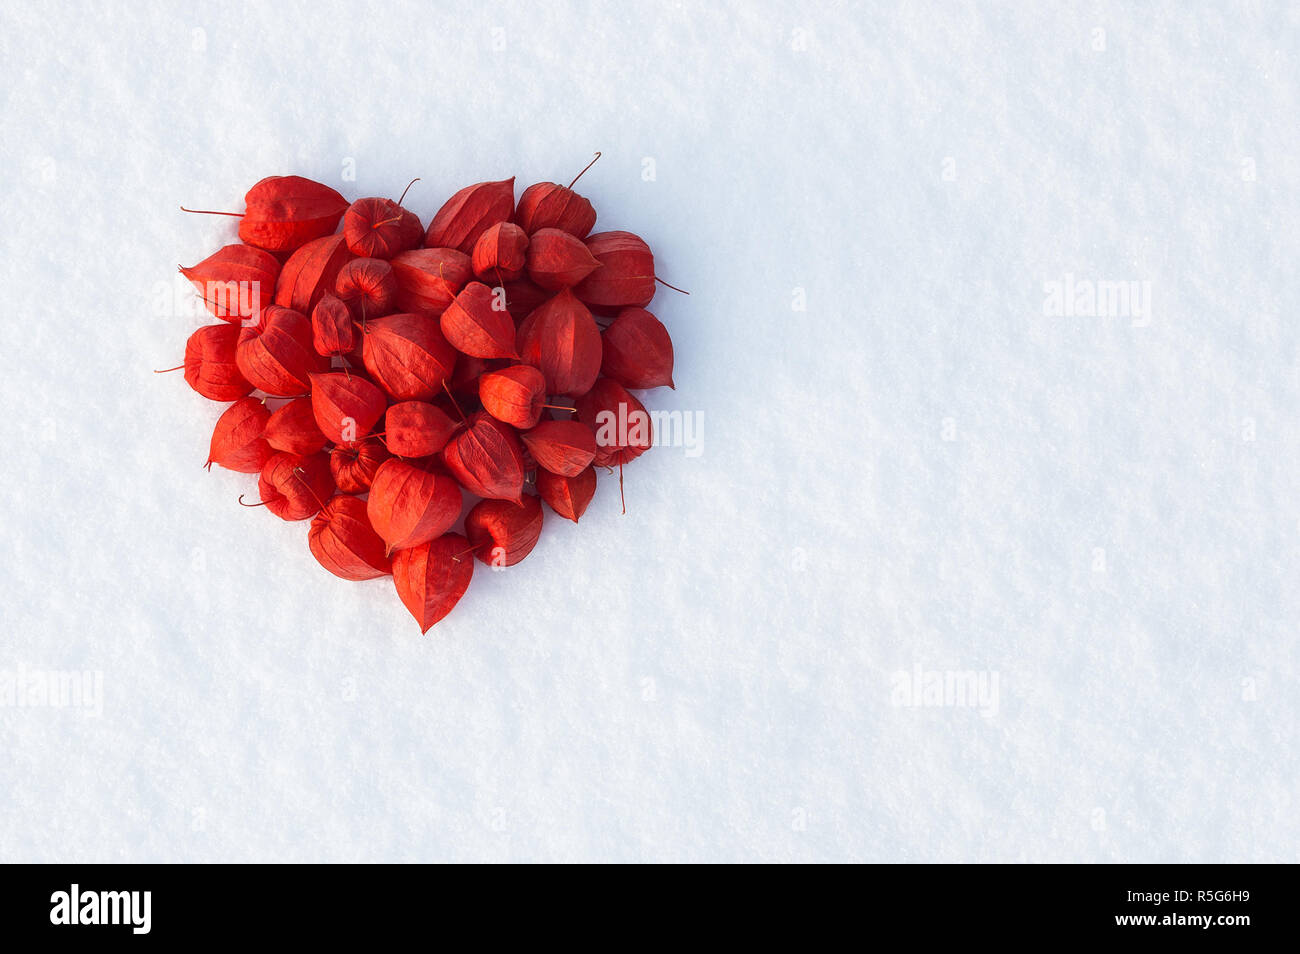 Valentine card with red heart on snow. Festive background with copy space for greeting text Stock Photo